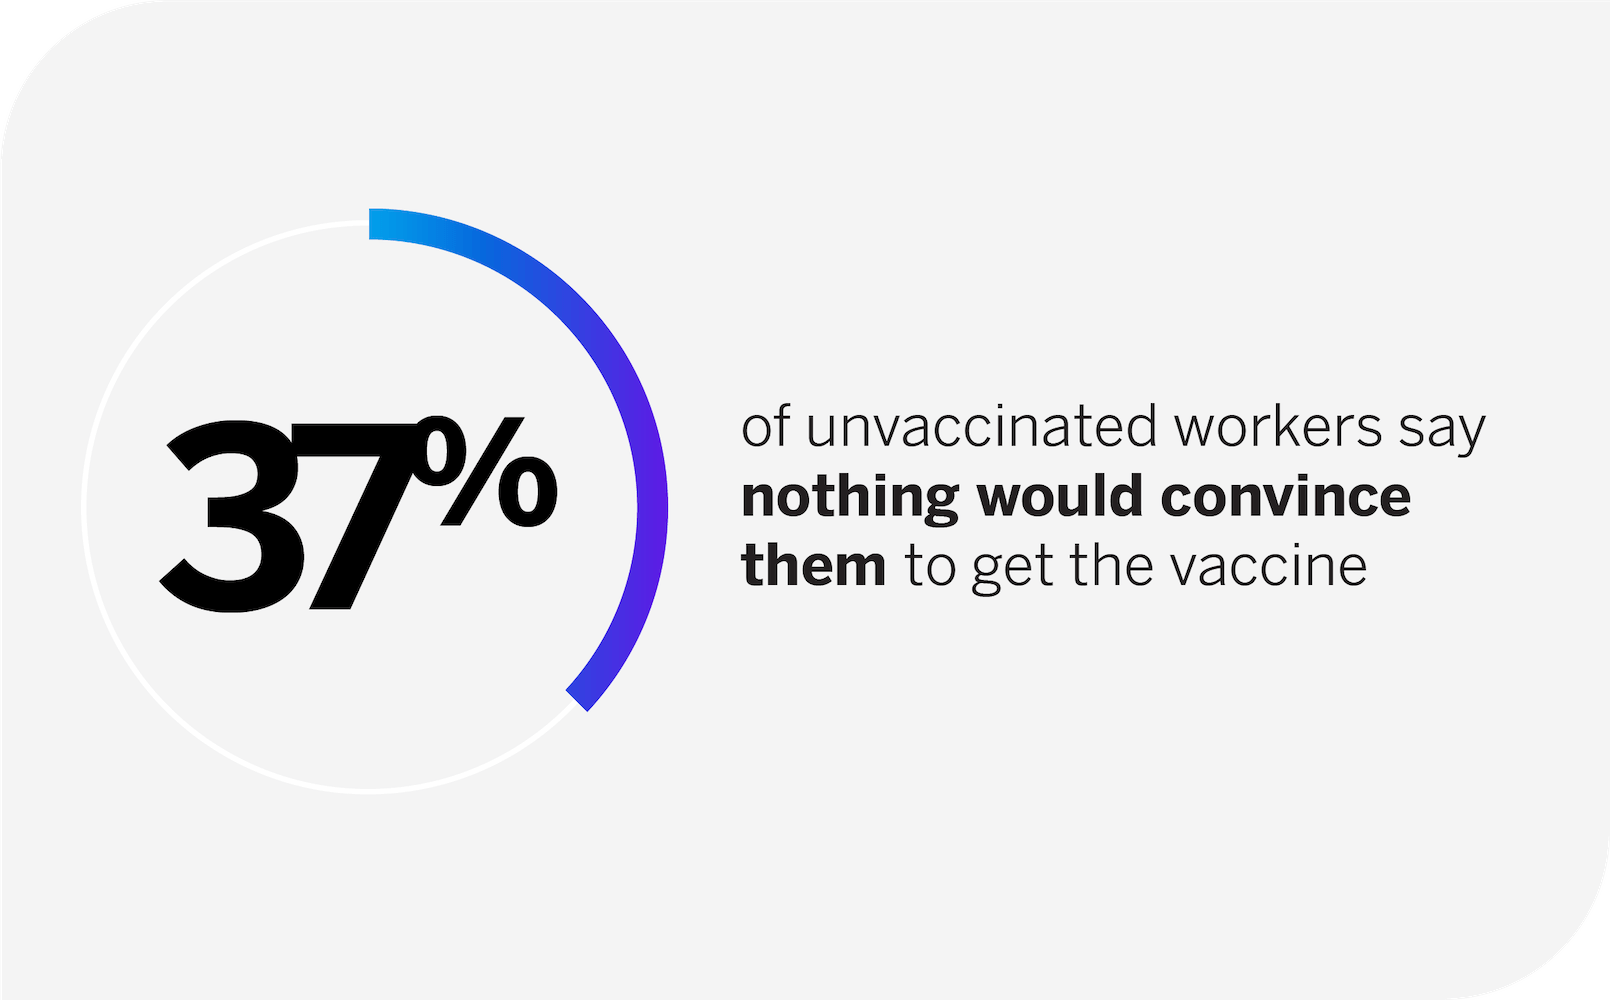 Stat regarding unvaccinated workers